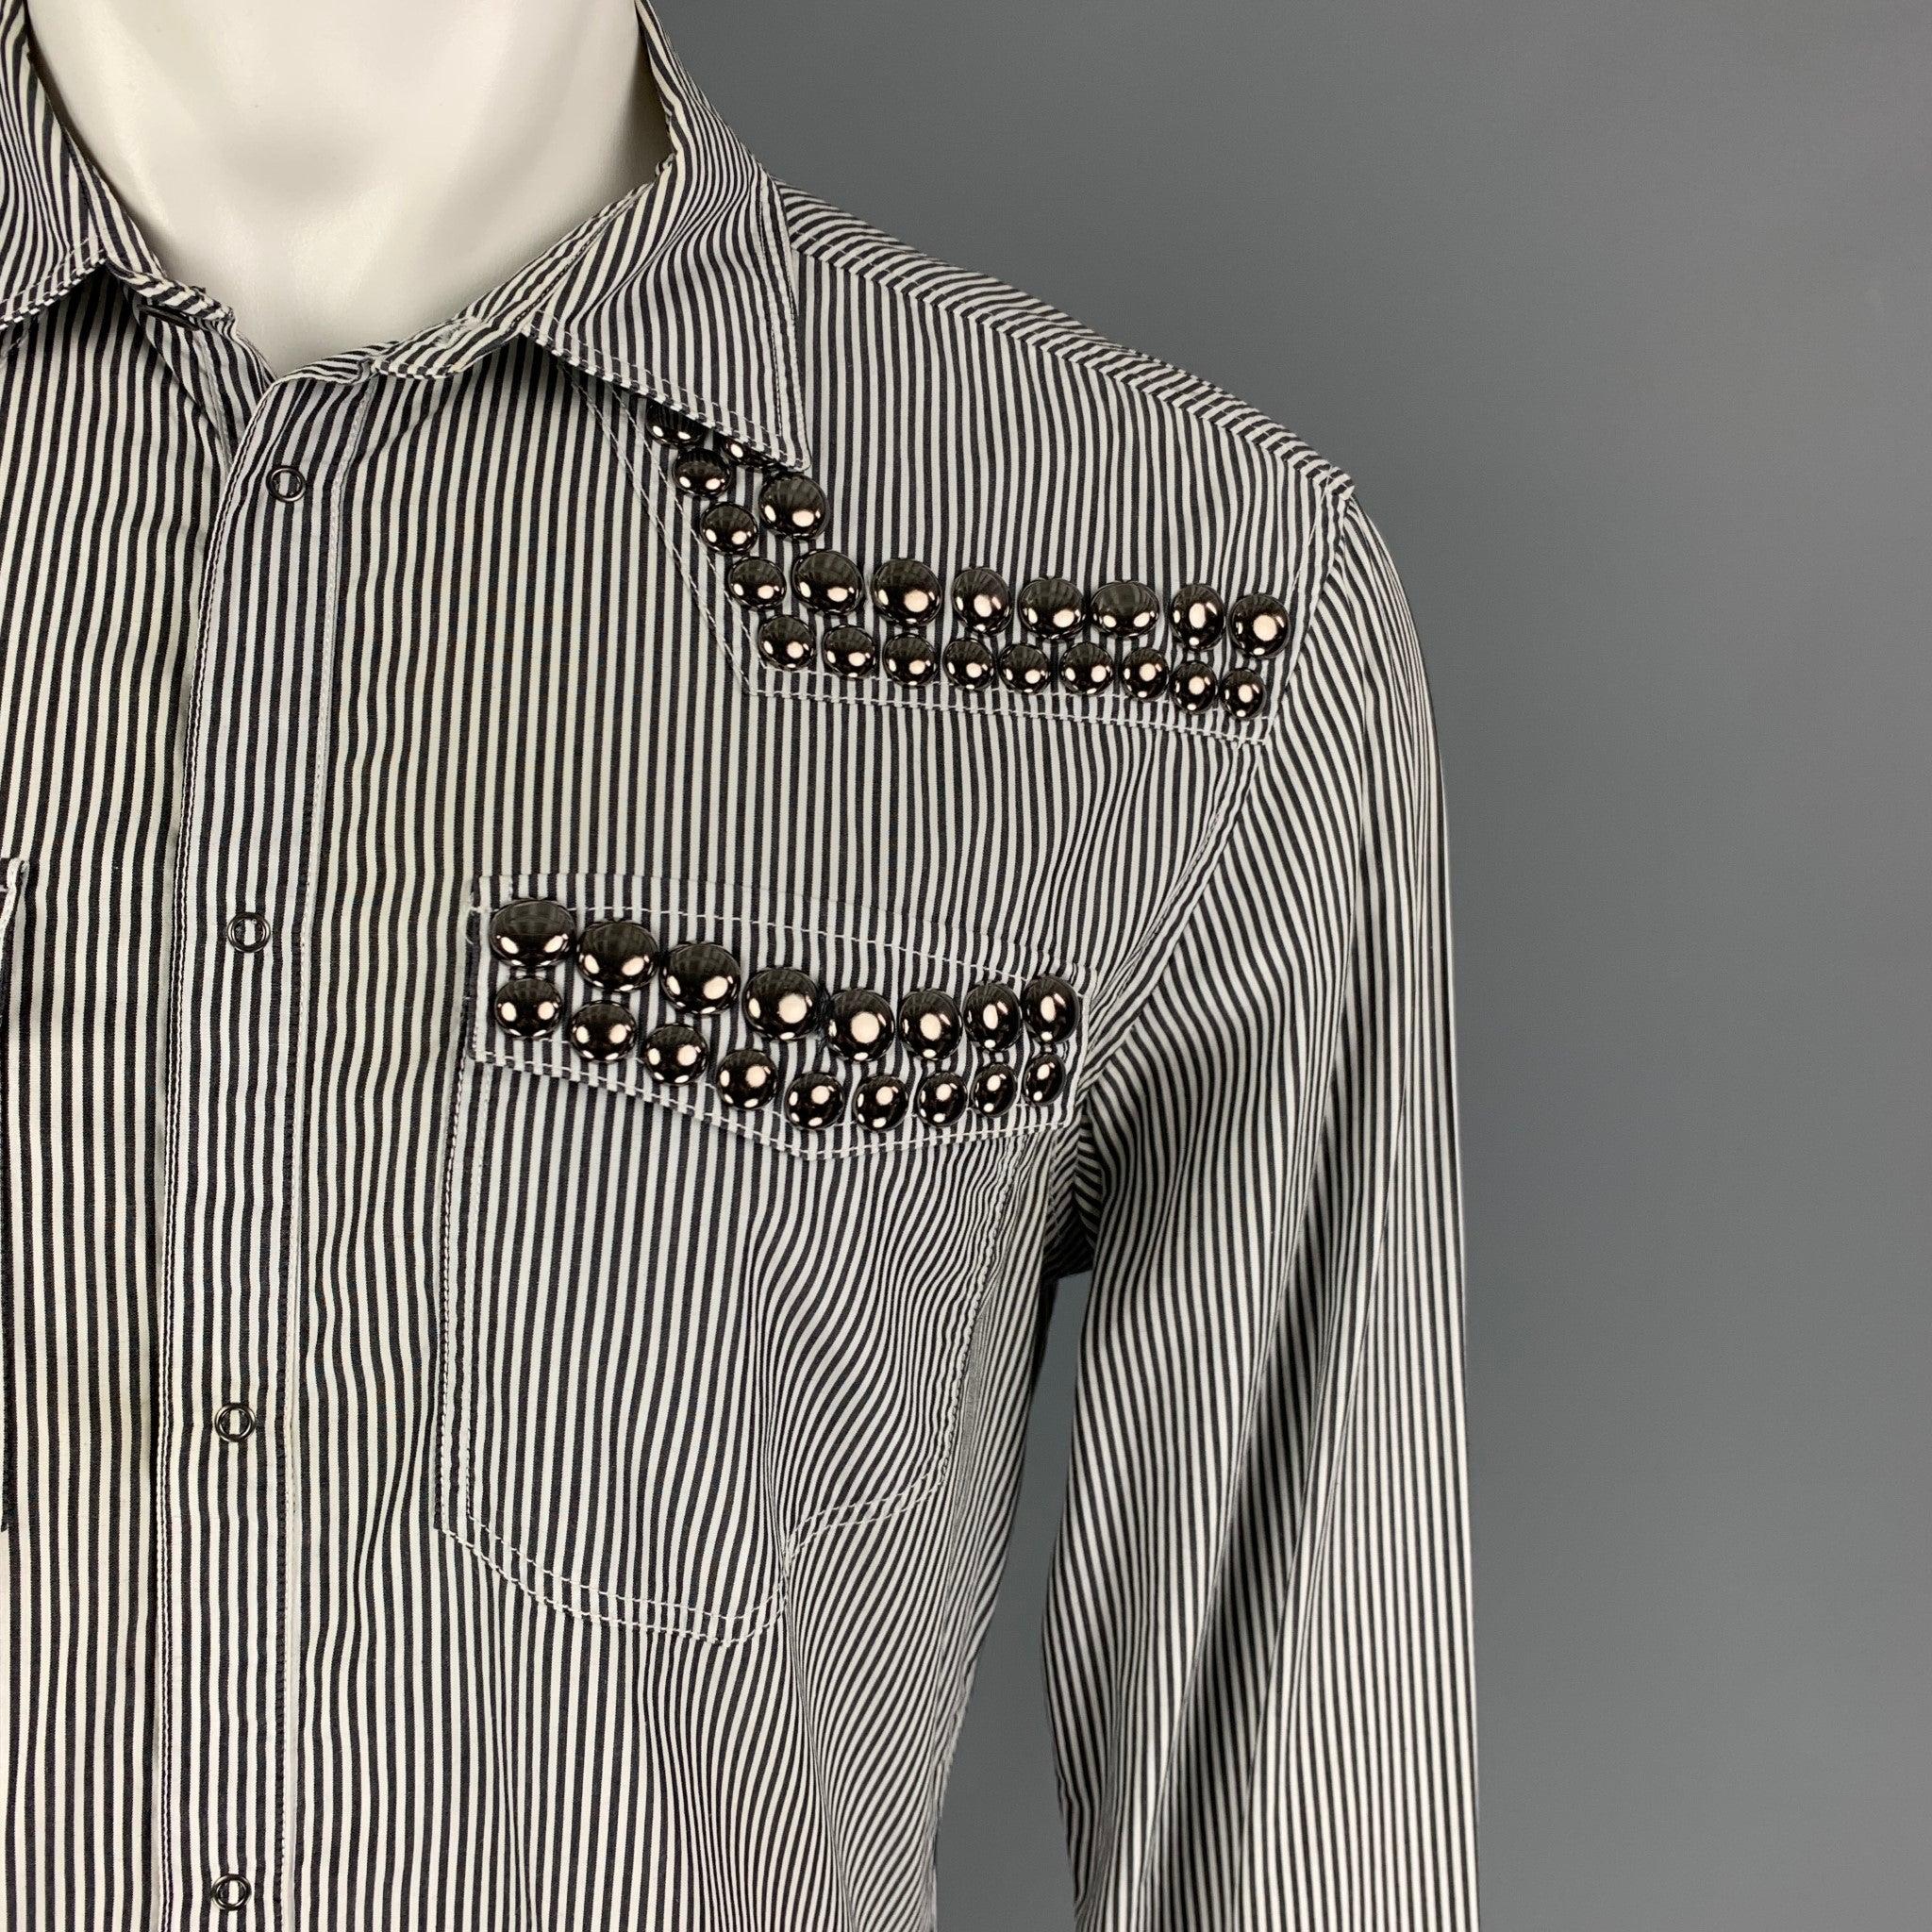 PIERRE BALMAIN long sleeve shirt comes in a black & white stripe cotton featuring studded details, spread collar, and a snap button closure. Made in Italy.Very Good Pre-Owned Condition. 

Marked:   36/50 

Measurements: 
 
Shoulder: 19 inches Chest: